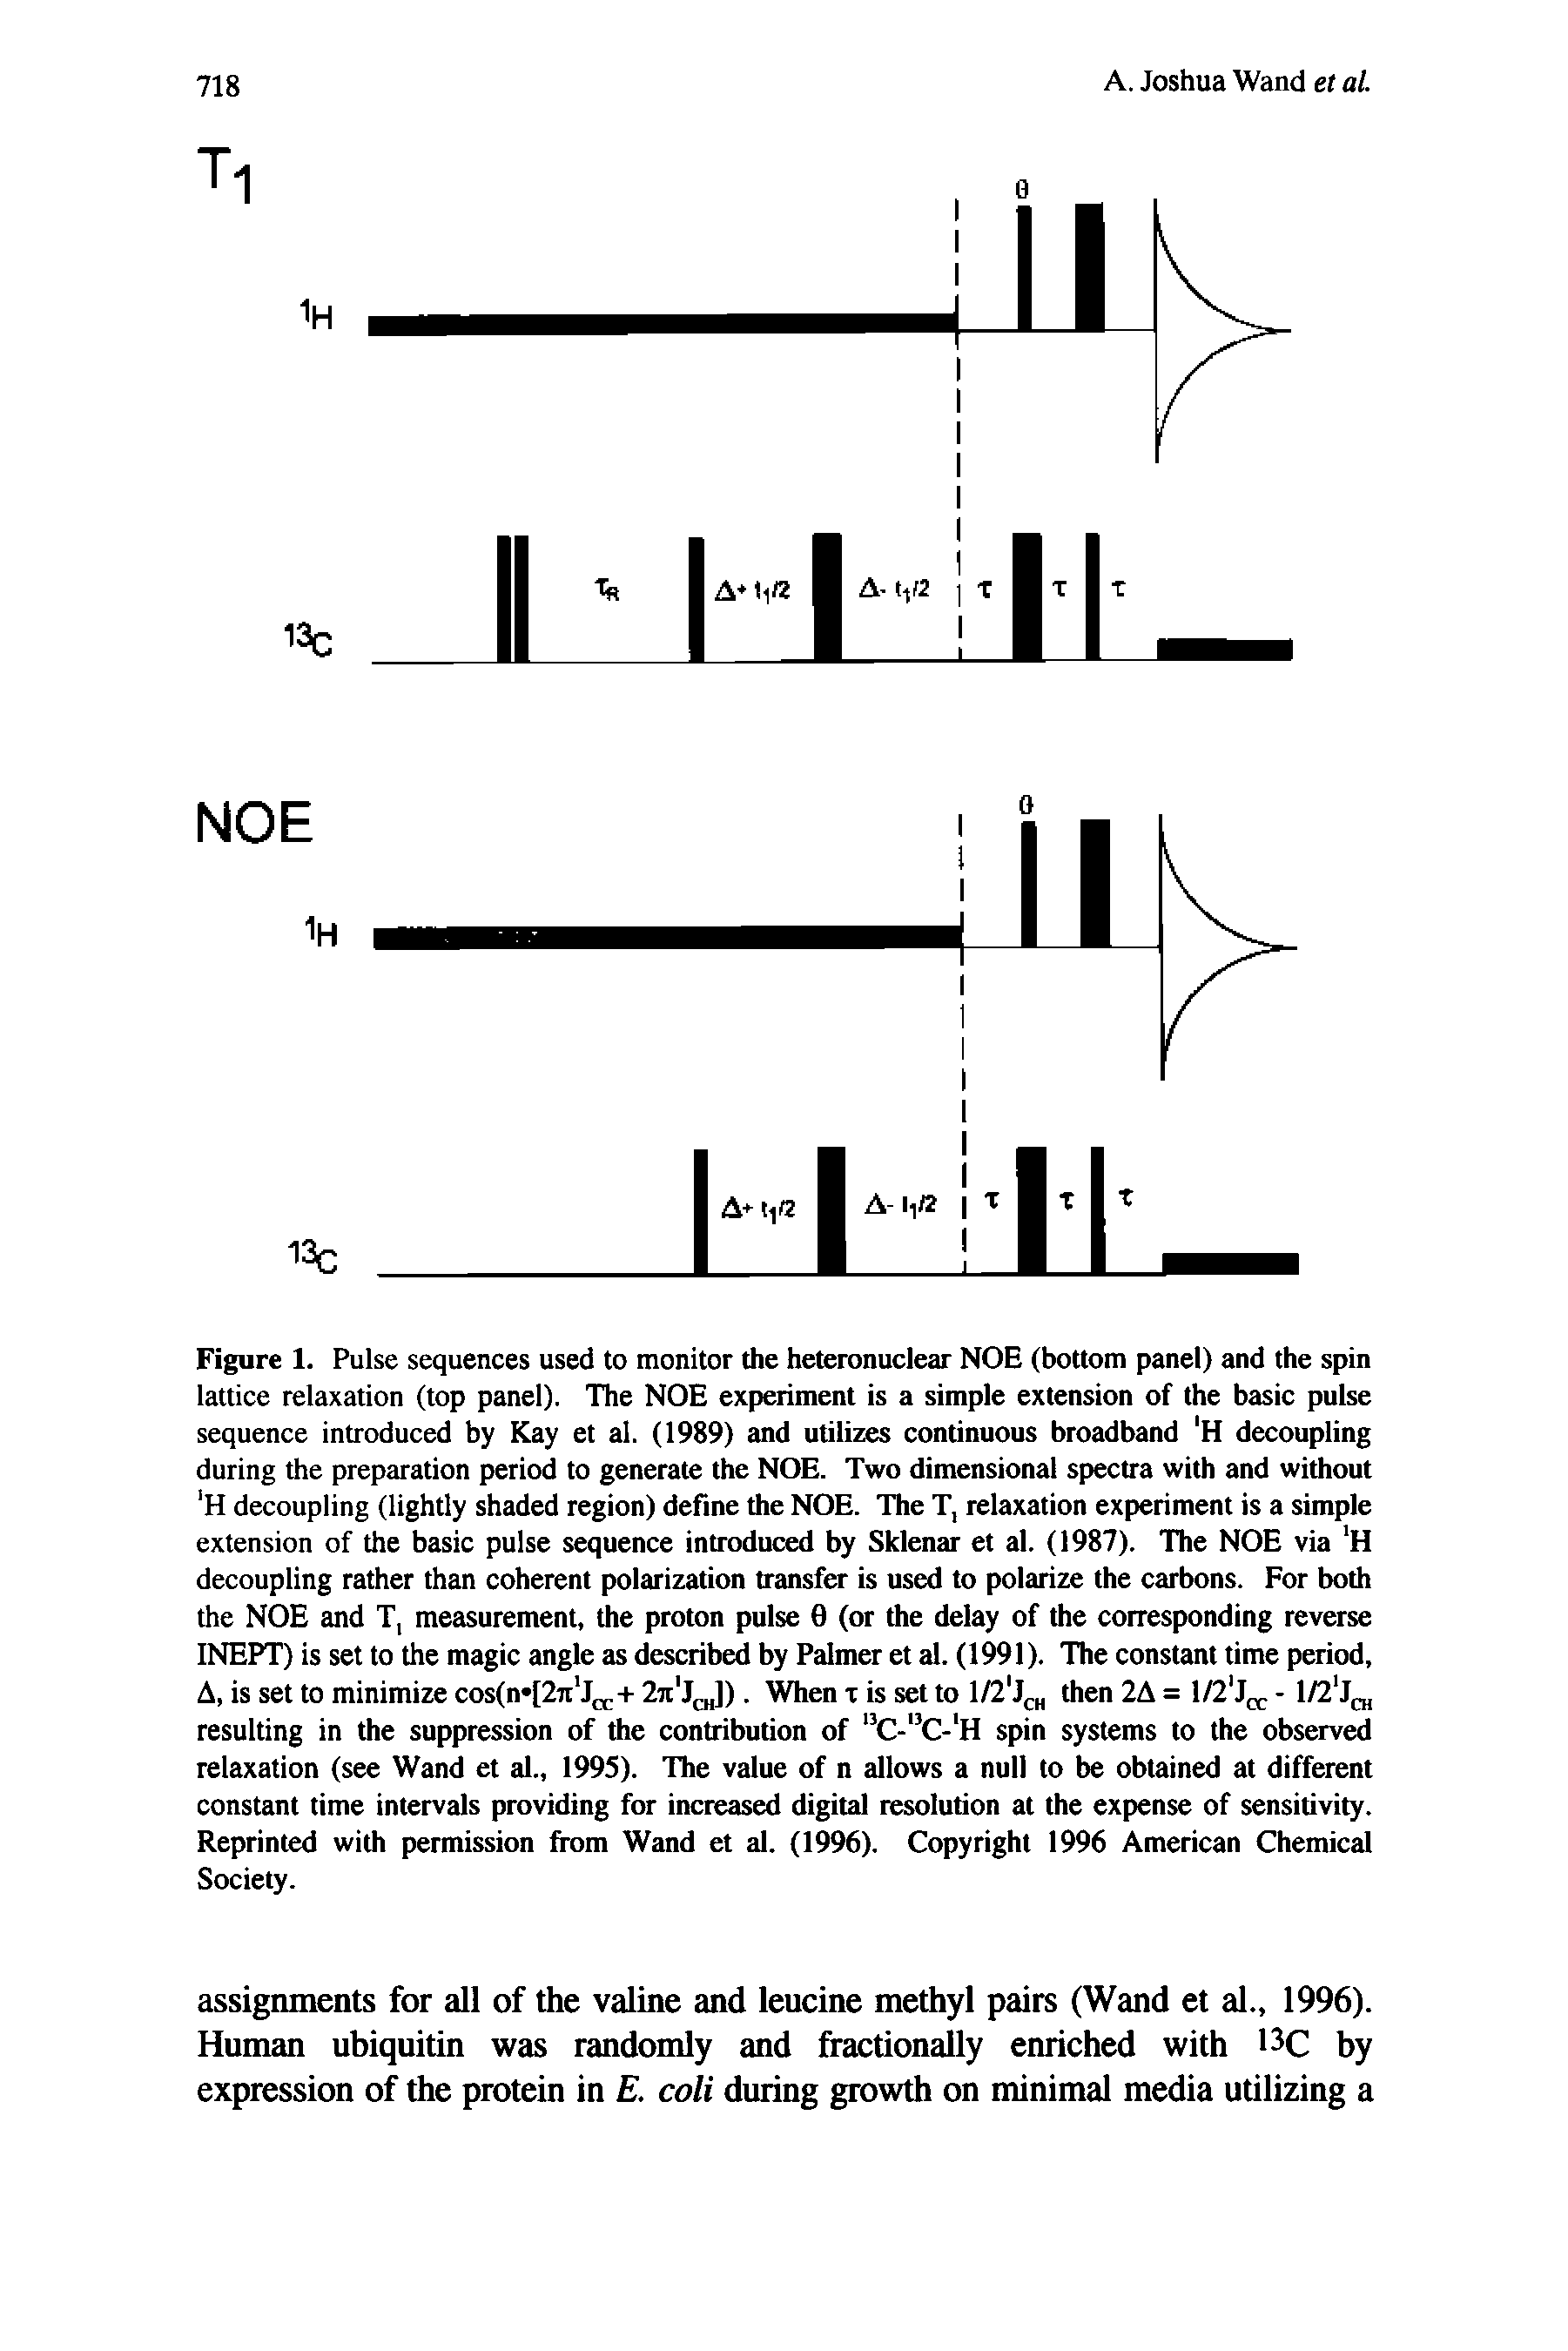 Figure 1. Pulse sequences used to monitor the heteronuclear NOE (bottom panel) and the spin lattice relaxation (top panel). The NOE experiment is a simple extension of the basic pulse sequence introduced by Kay et al. (1989) and utilizes continuous broadband H decoupling during the preparation period to generate the NOE. Two dimensional spectra with and without H decoupling (lightly shaded region) define the NOE. The T, relaxation experiment is a simple extension of the basic pulse sequence introduced by Sklenar et al. (1987). The NOE via H decoupling rather than coherent polarization transfer is used to polarize the carbons. For both the NOE and T, measurement, the proton pulse 0 (or the delay of the corresponding reverse INEPT) is set to the magic angle as described by Palmer et al. (1991). The constant time period, A, is set to minimize cos(n [27i J + 27t Jo,]). When x is set to l/2 Jc then 2A = - 1/2 J( ...